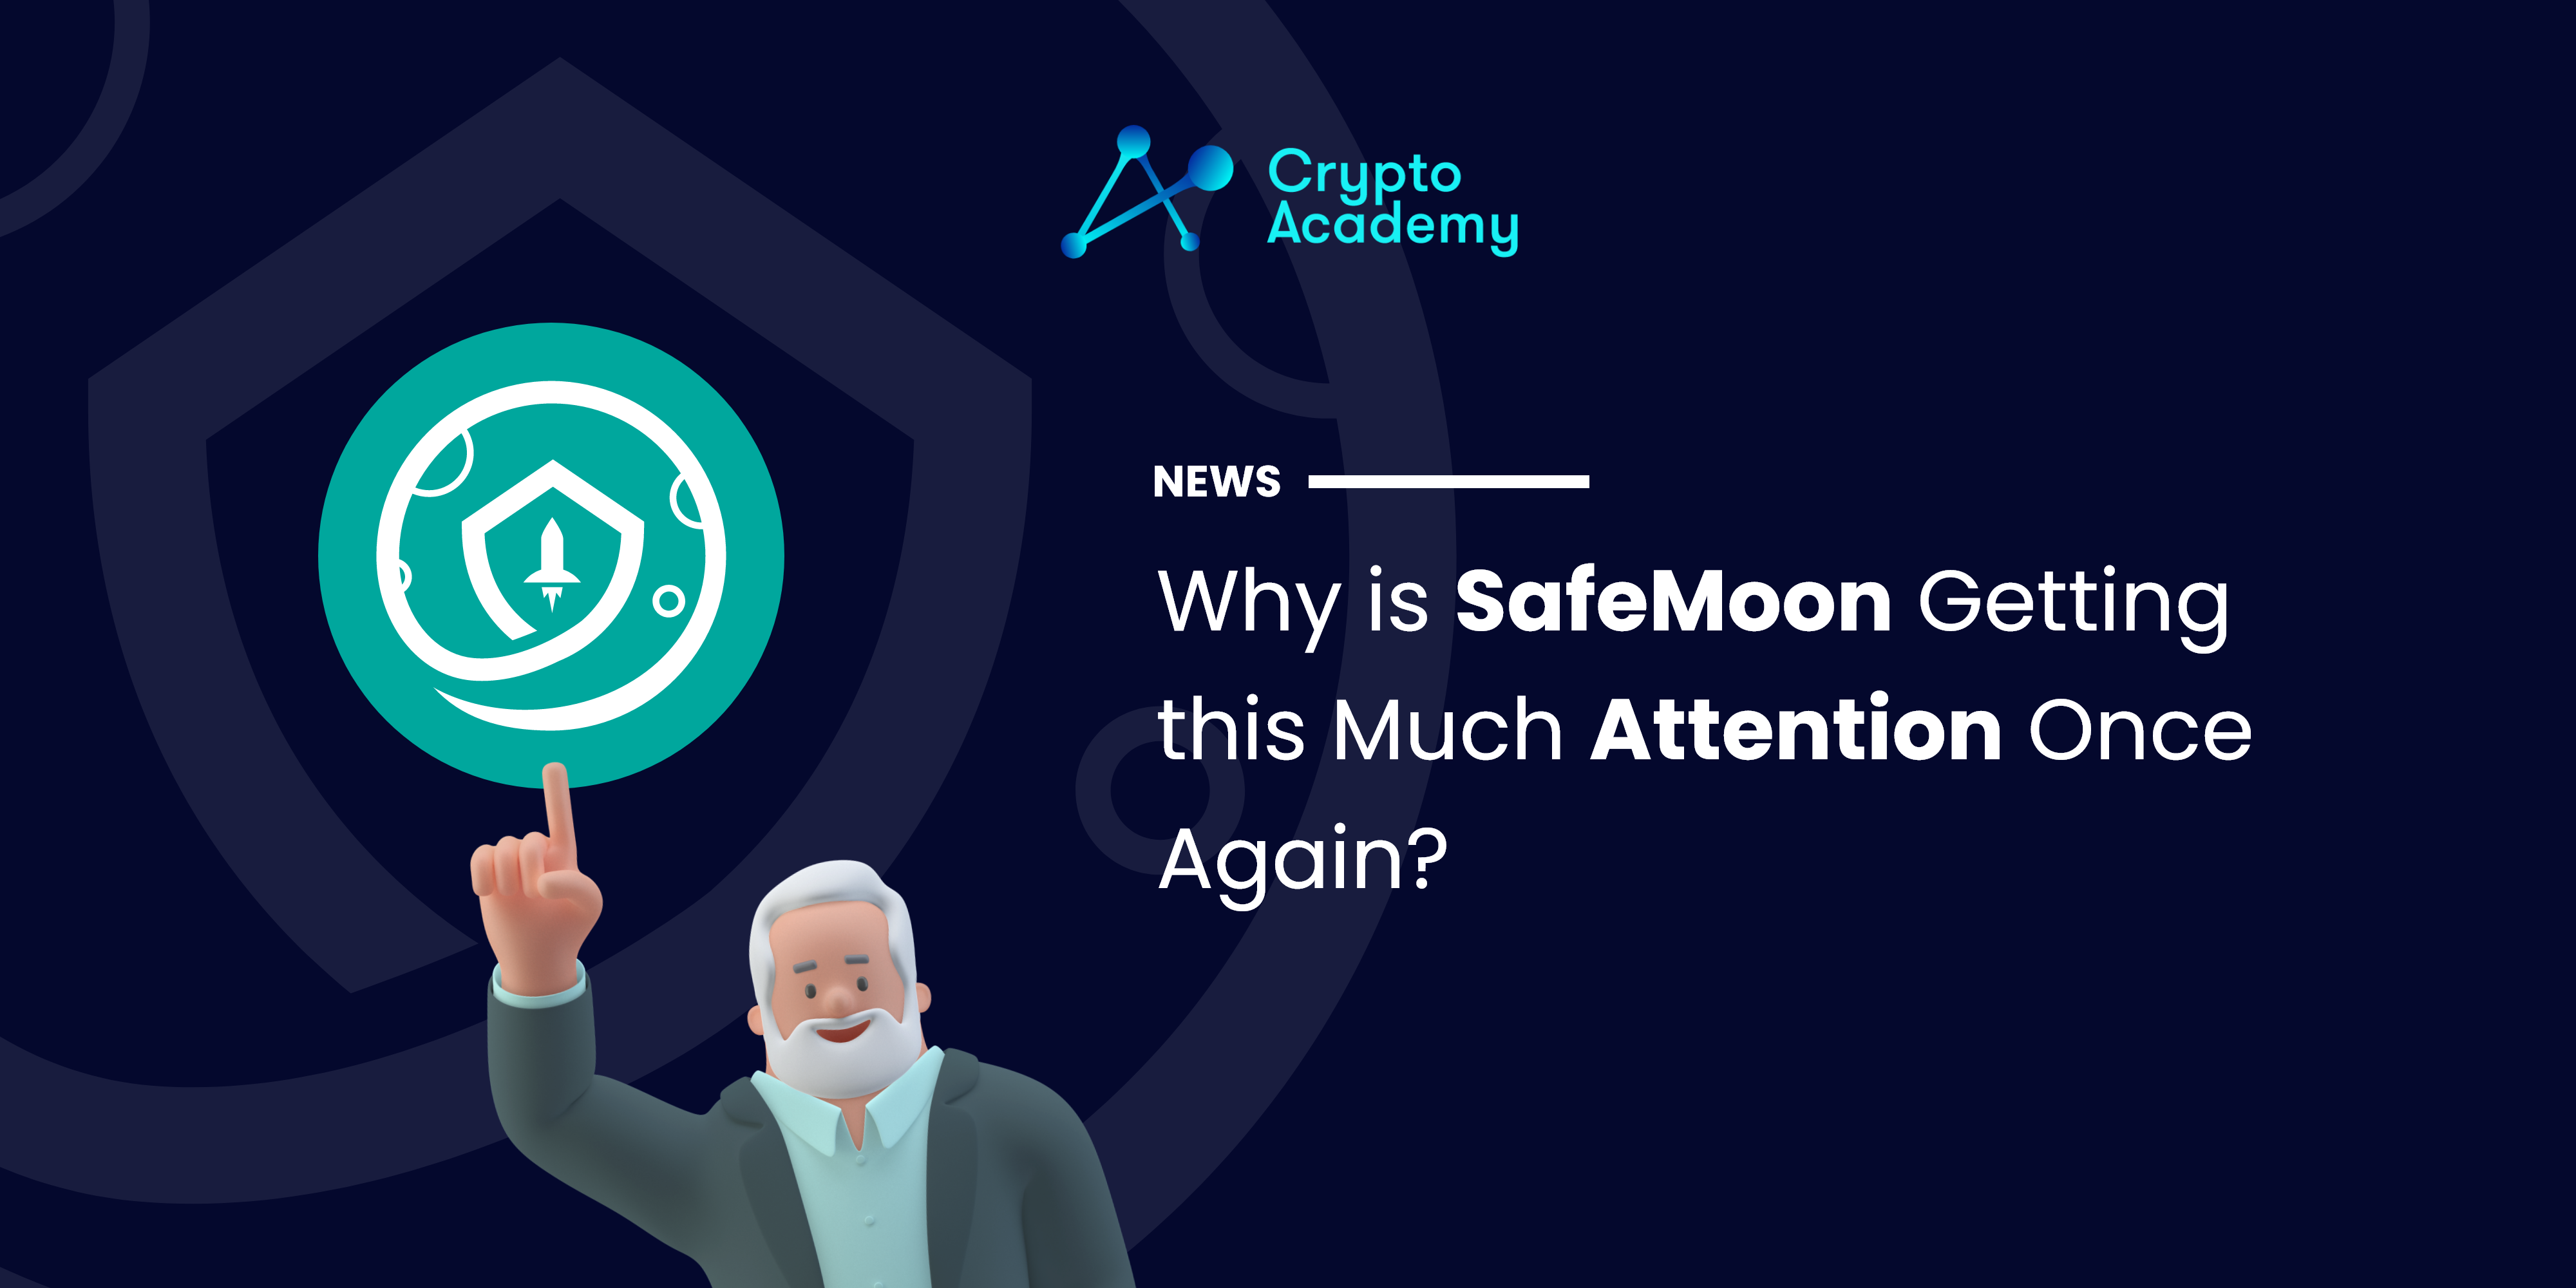 Why is SafeMoon Getting this Much Attention Once Again?